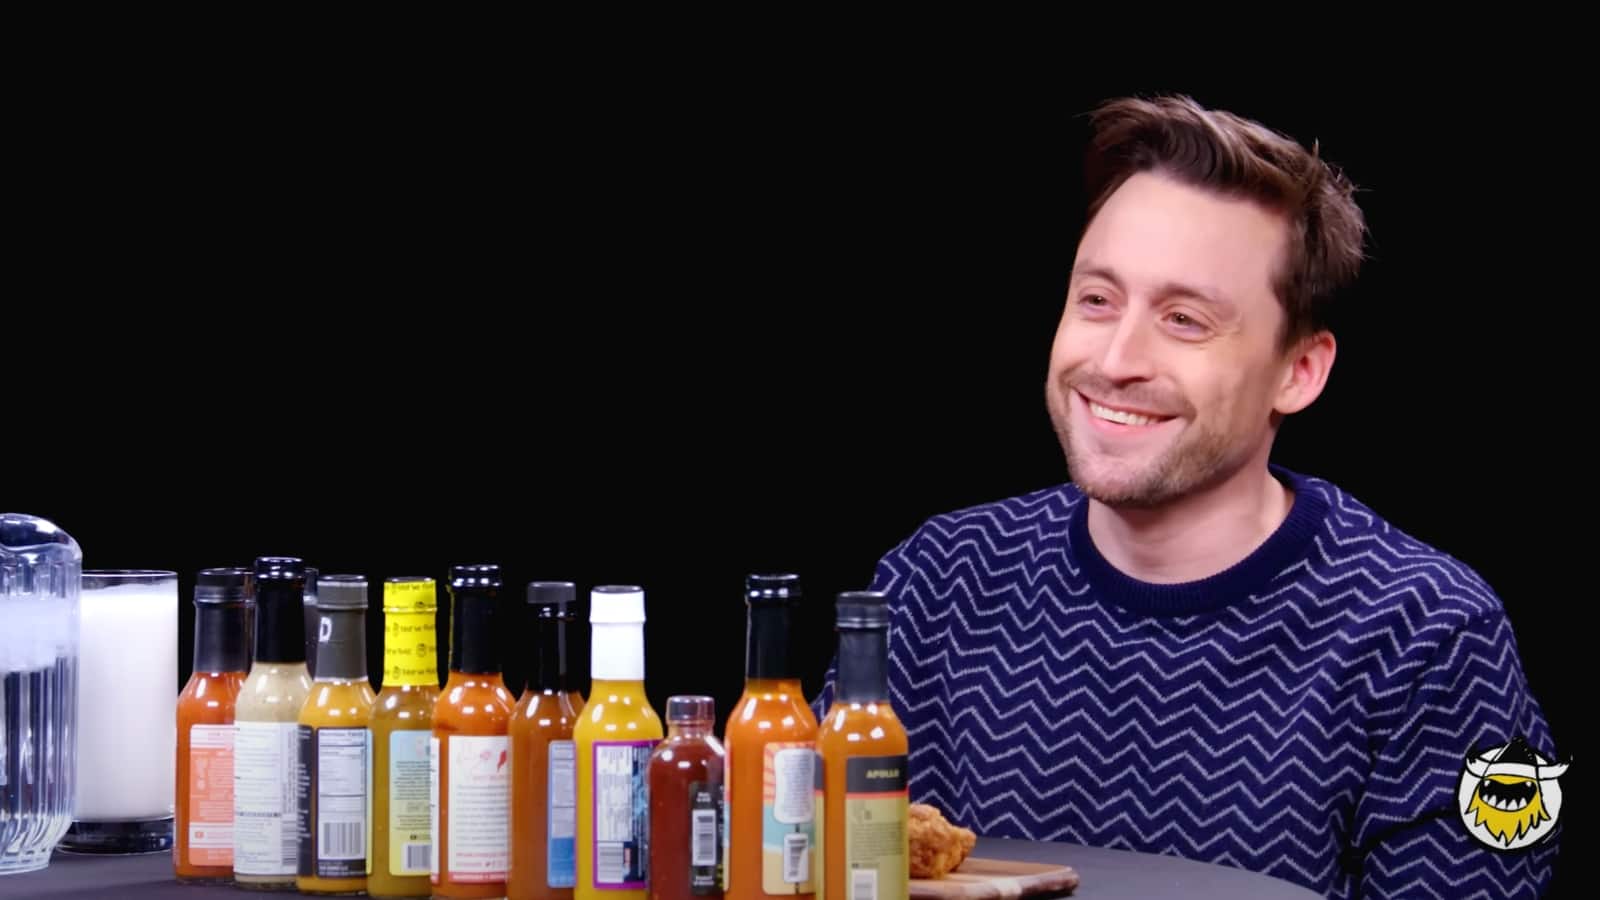 Quotes from Kieran Culkin's Appearance on The Hot Ones